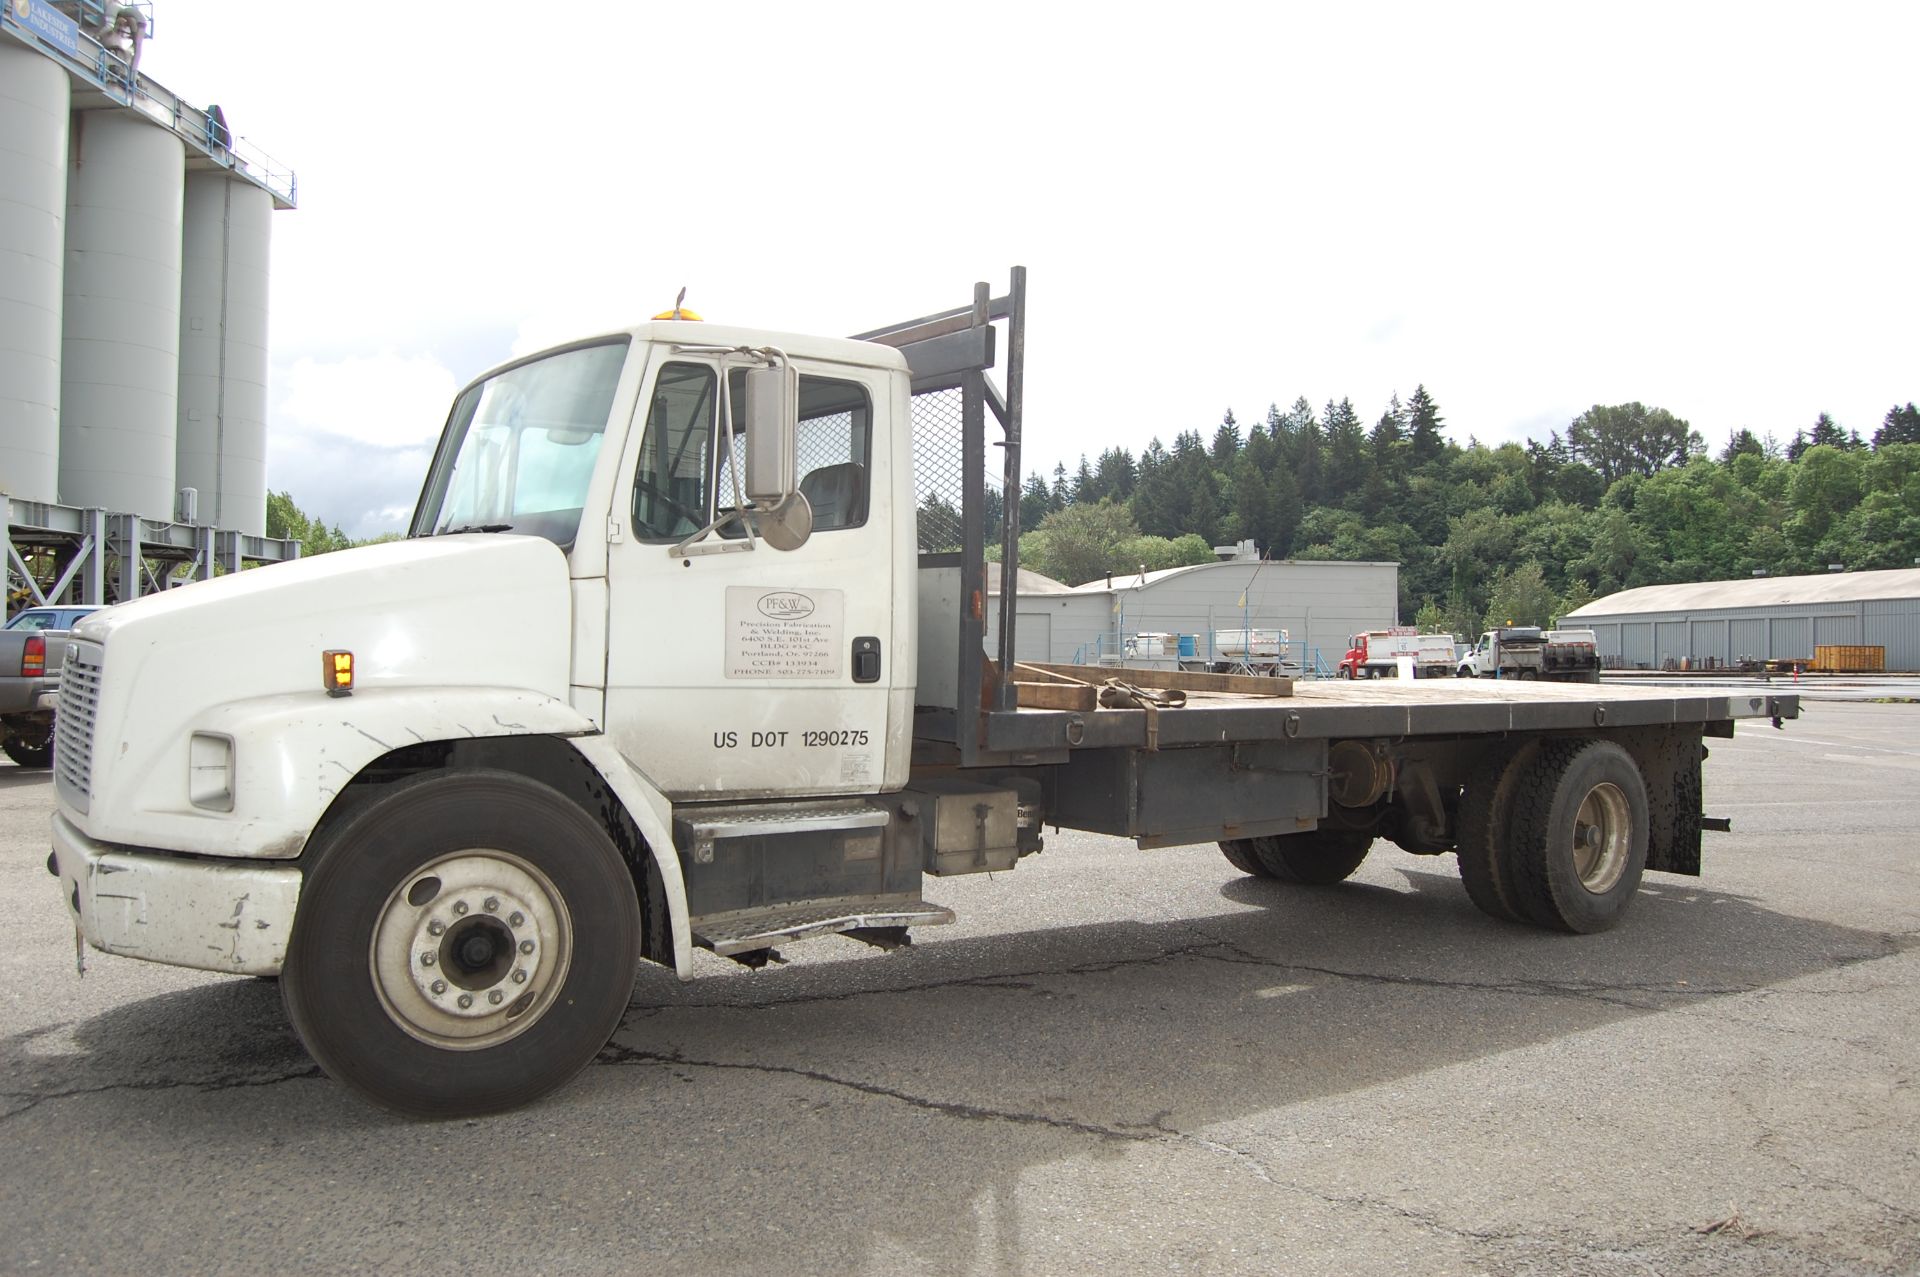 1996 Freightliner F70 20' Tandem axle Flatbed Truck 6 speed manual transmission